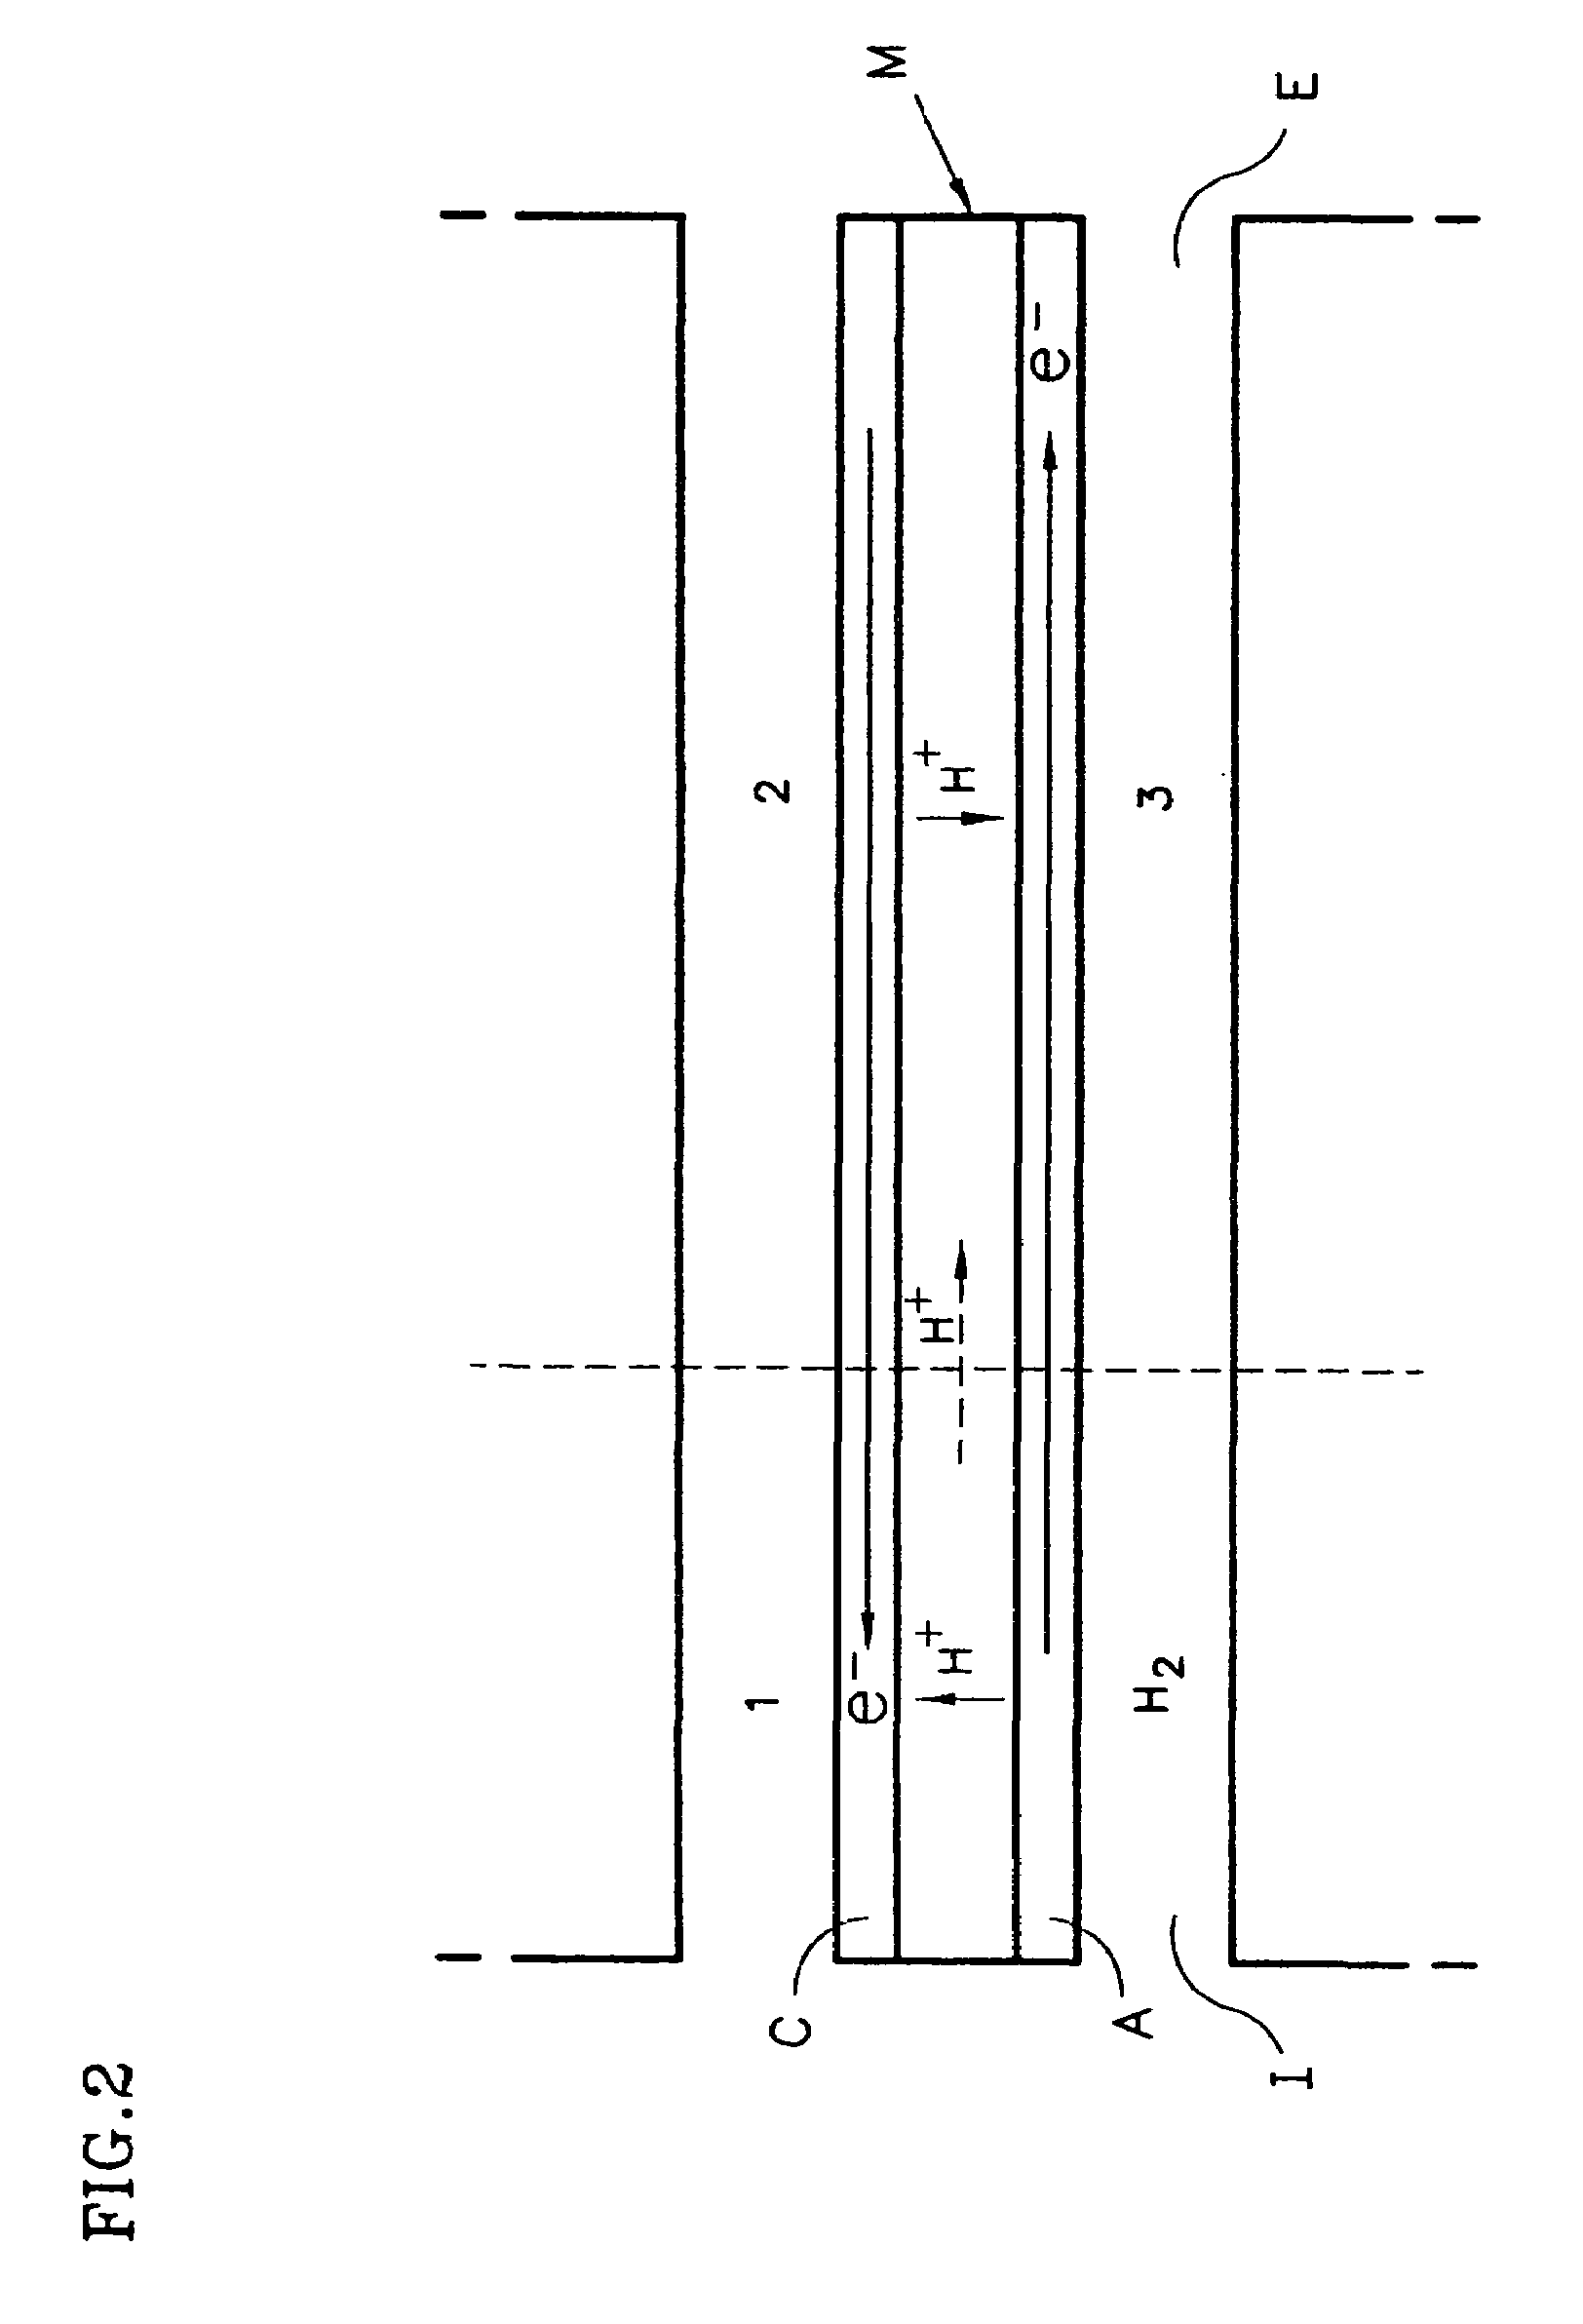 Procedure for starting up a fuel cell system having an anode exhaust recycle loop